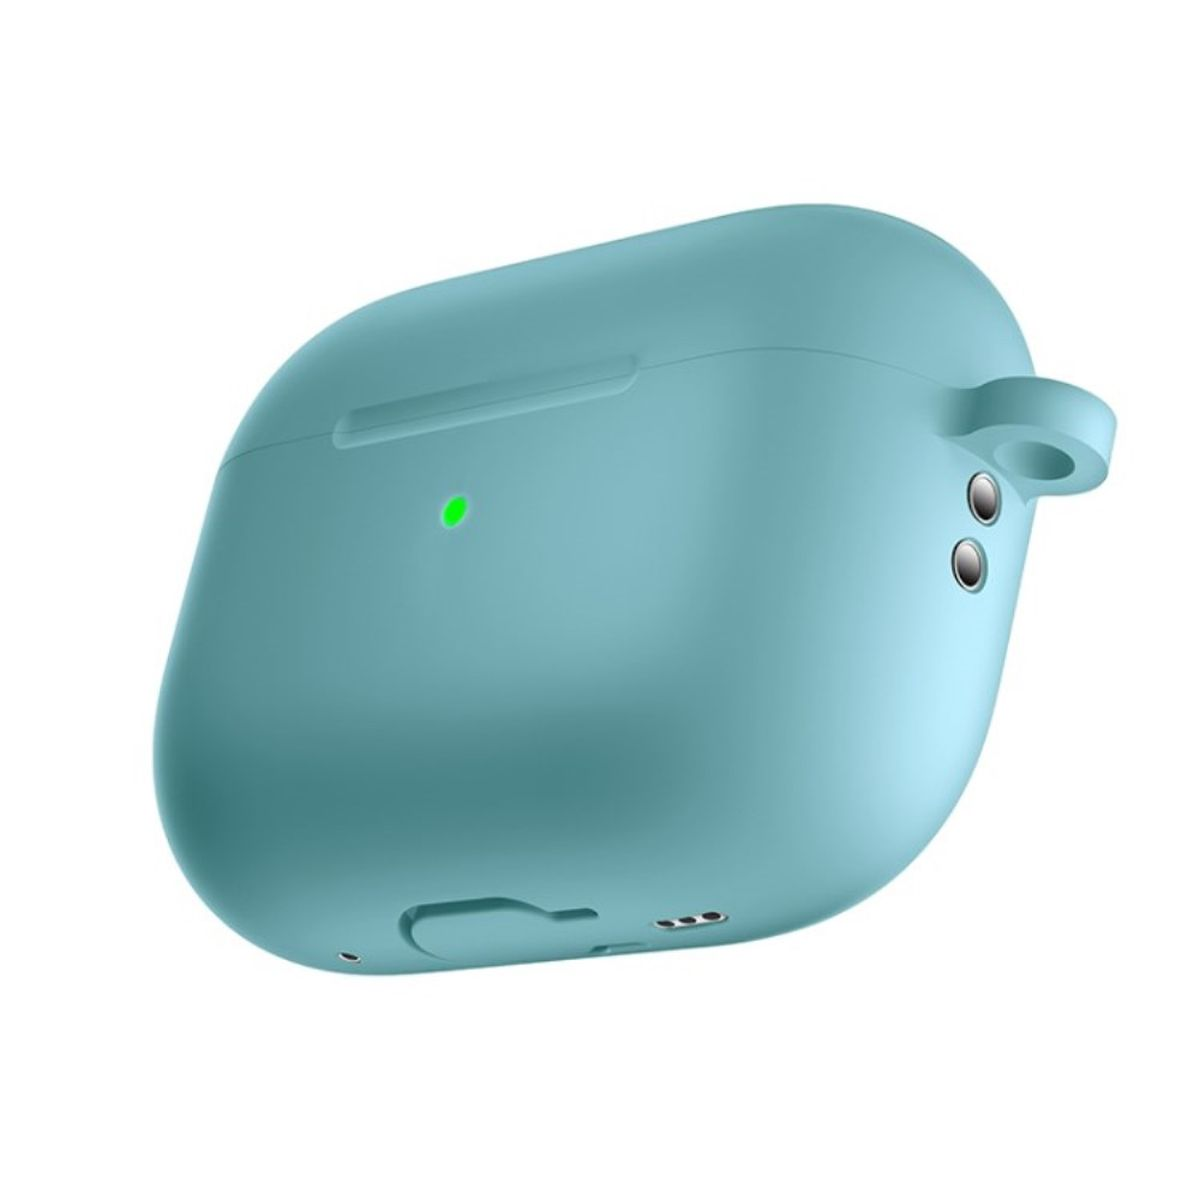 COVERKINGZ Silikoncover Ladecase für Apple Airpods mint, 2 Pro Unisex, 77380